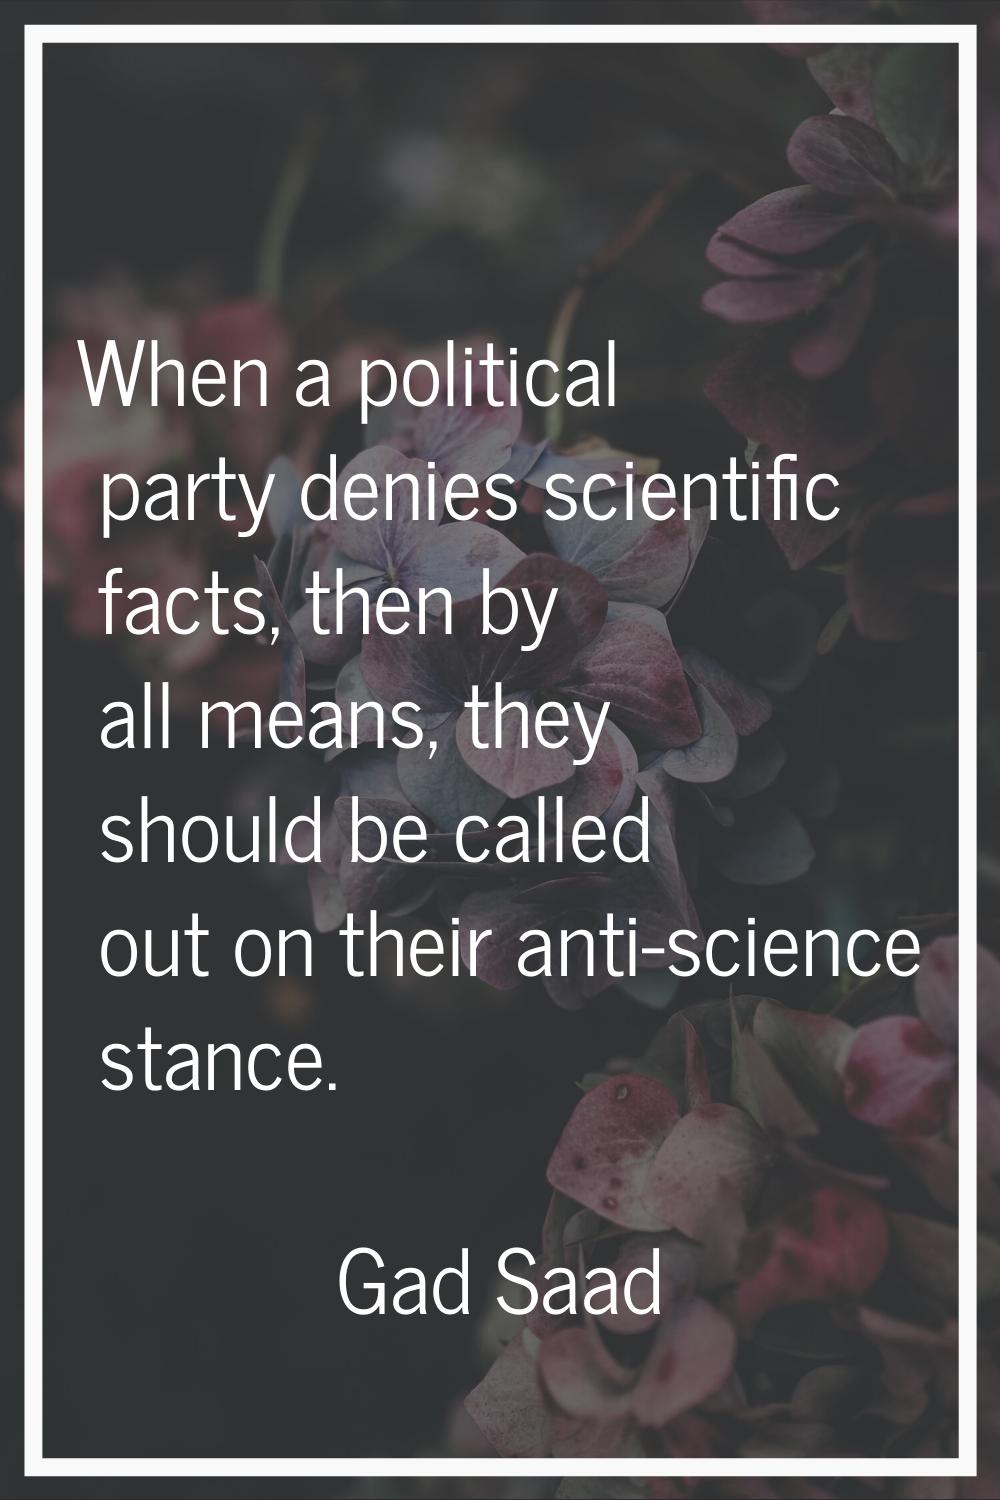 When a political party denies scientific facts, then by all means, they should be called out on the